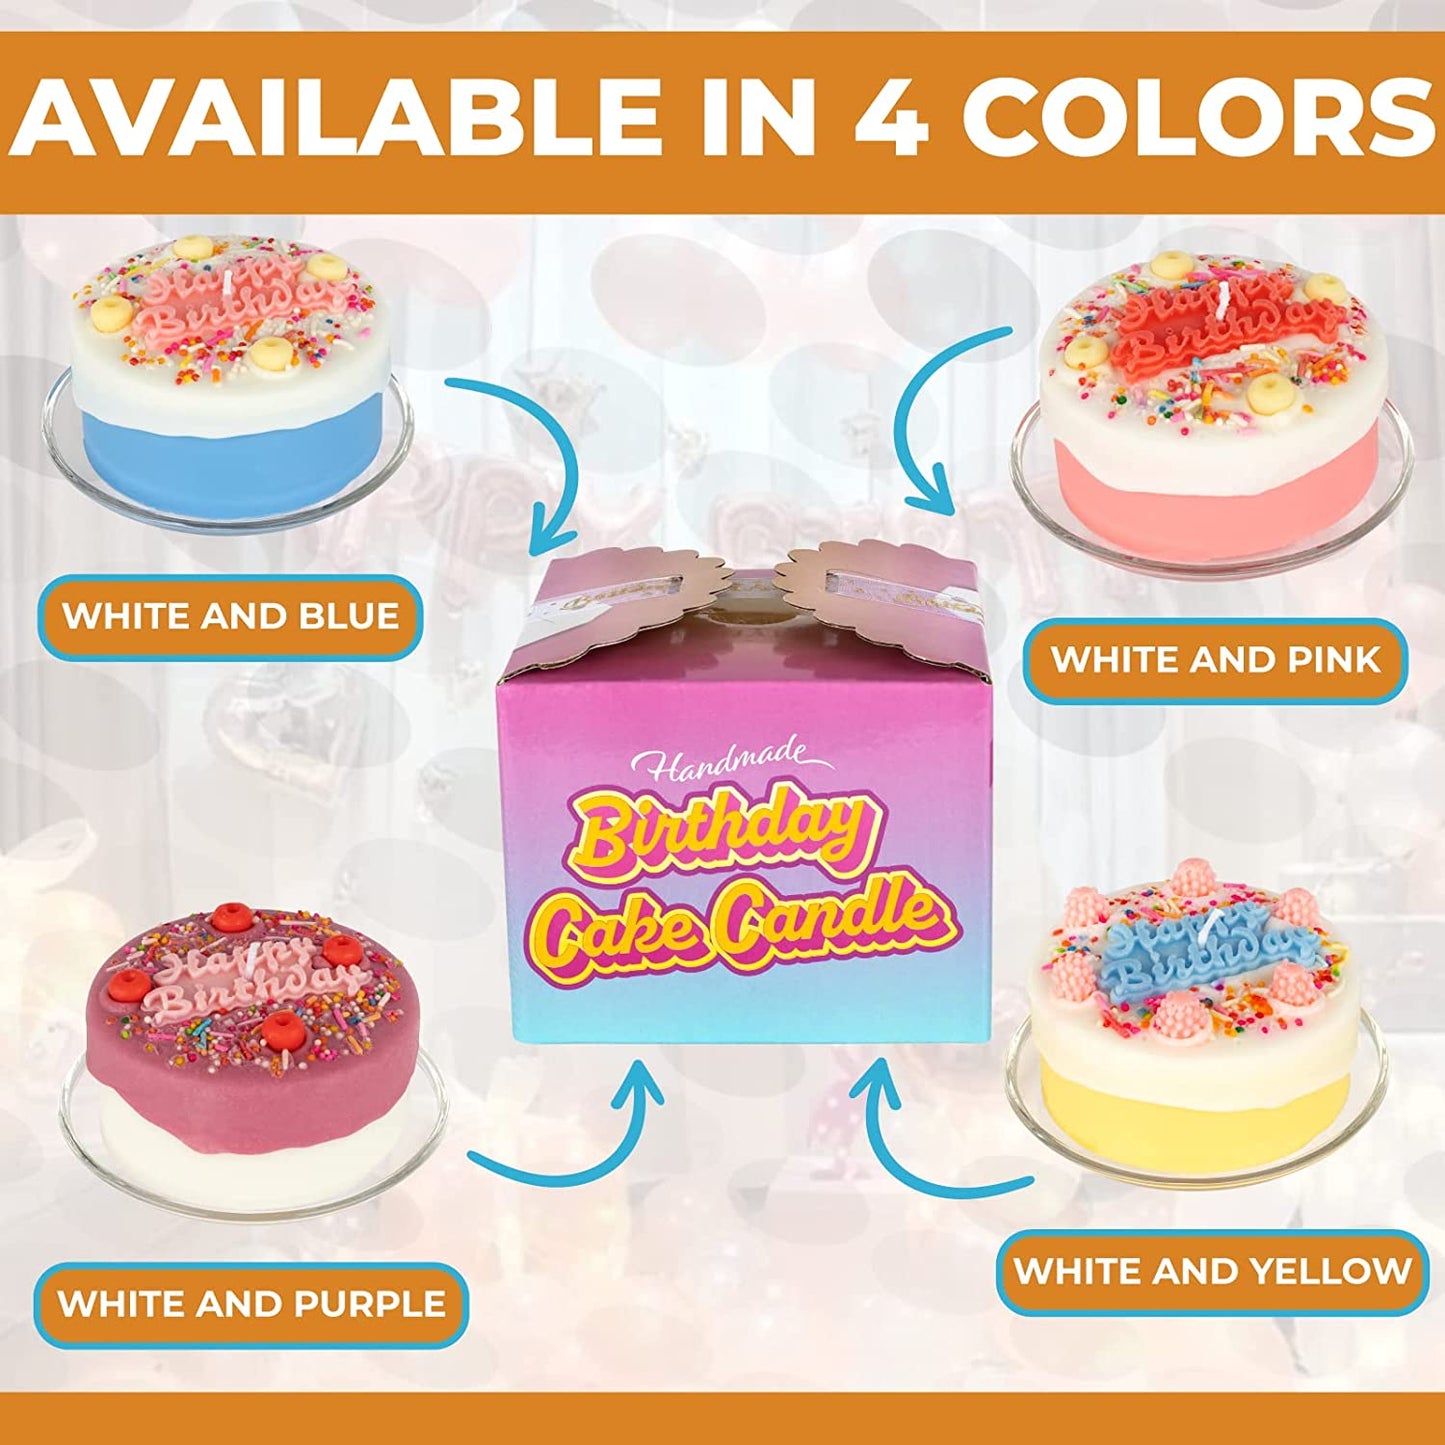 4 candles shaped like birthday cakes. There is text which says, 'available in 4 colors'. The four colors are white and blue, white and pink, white and purple plus white and yellow.